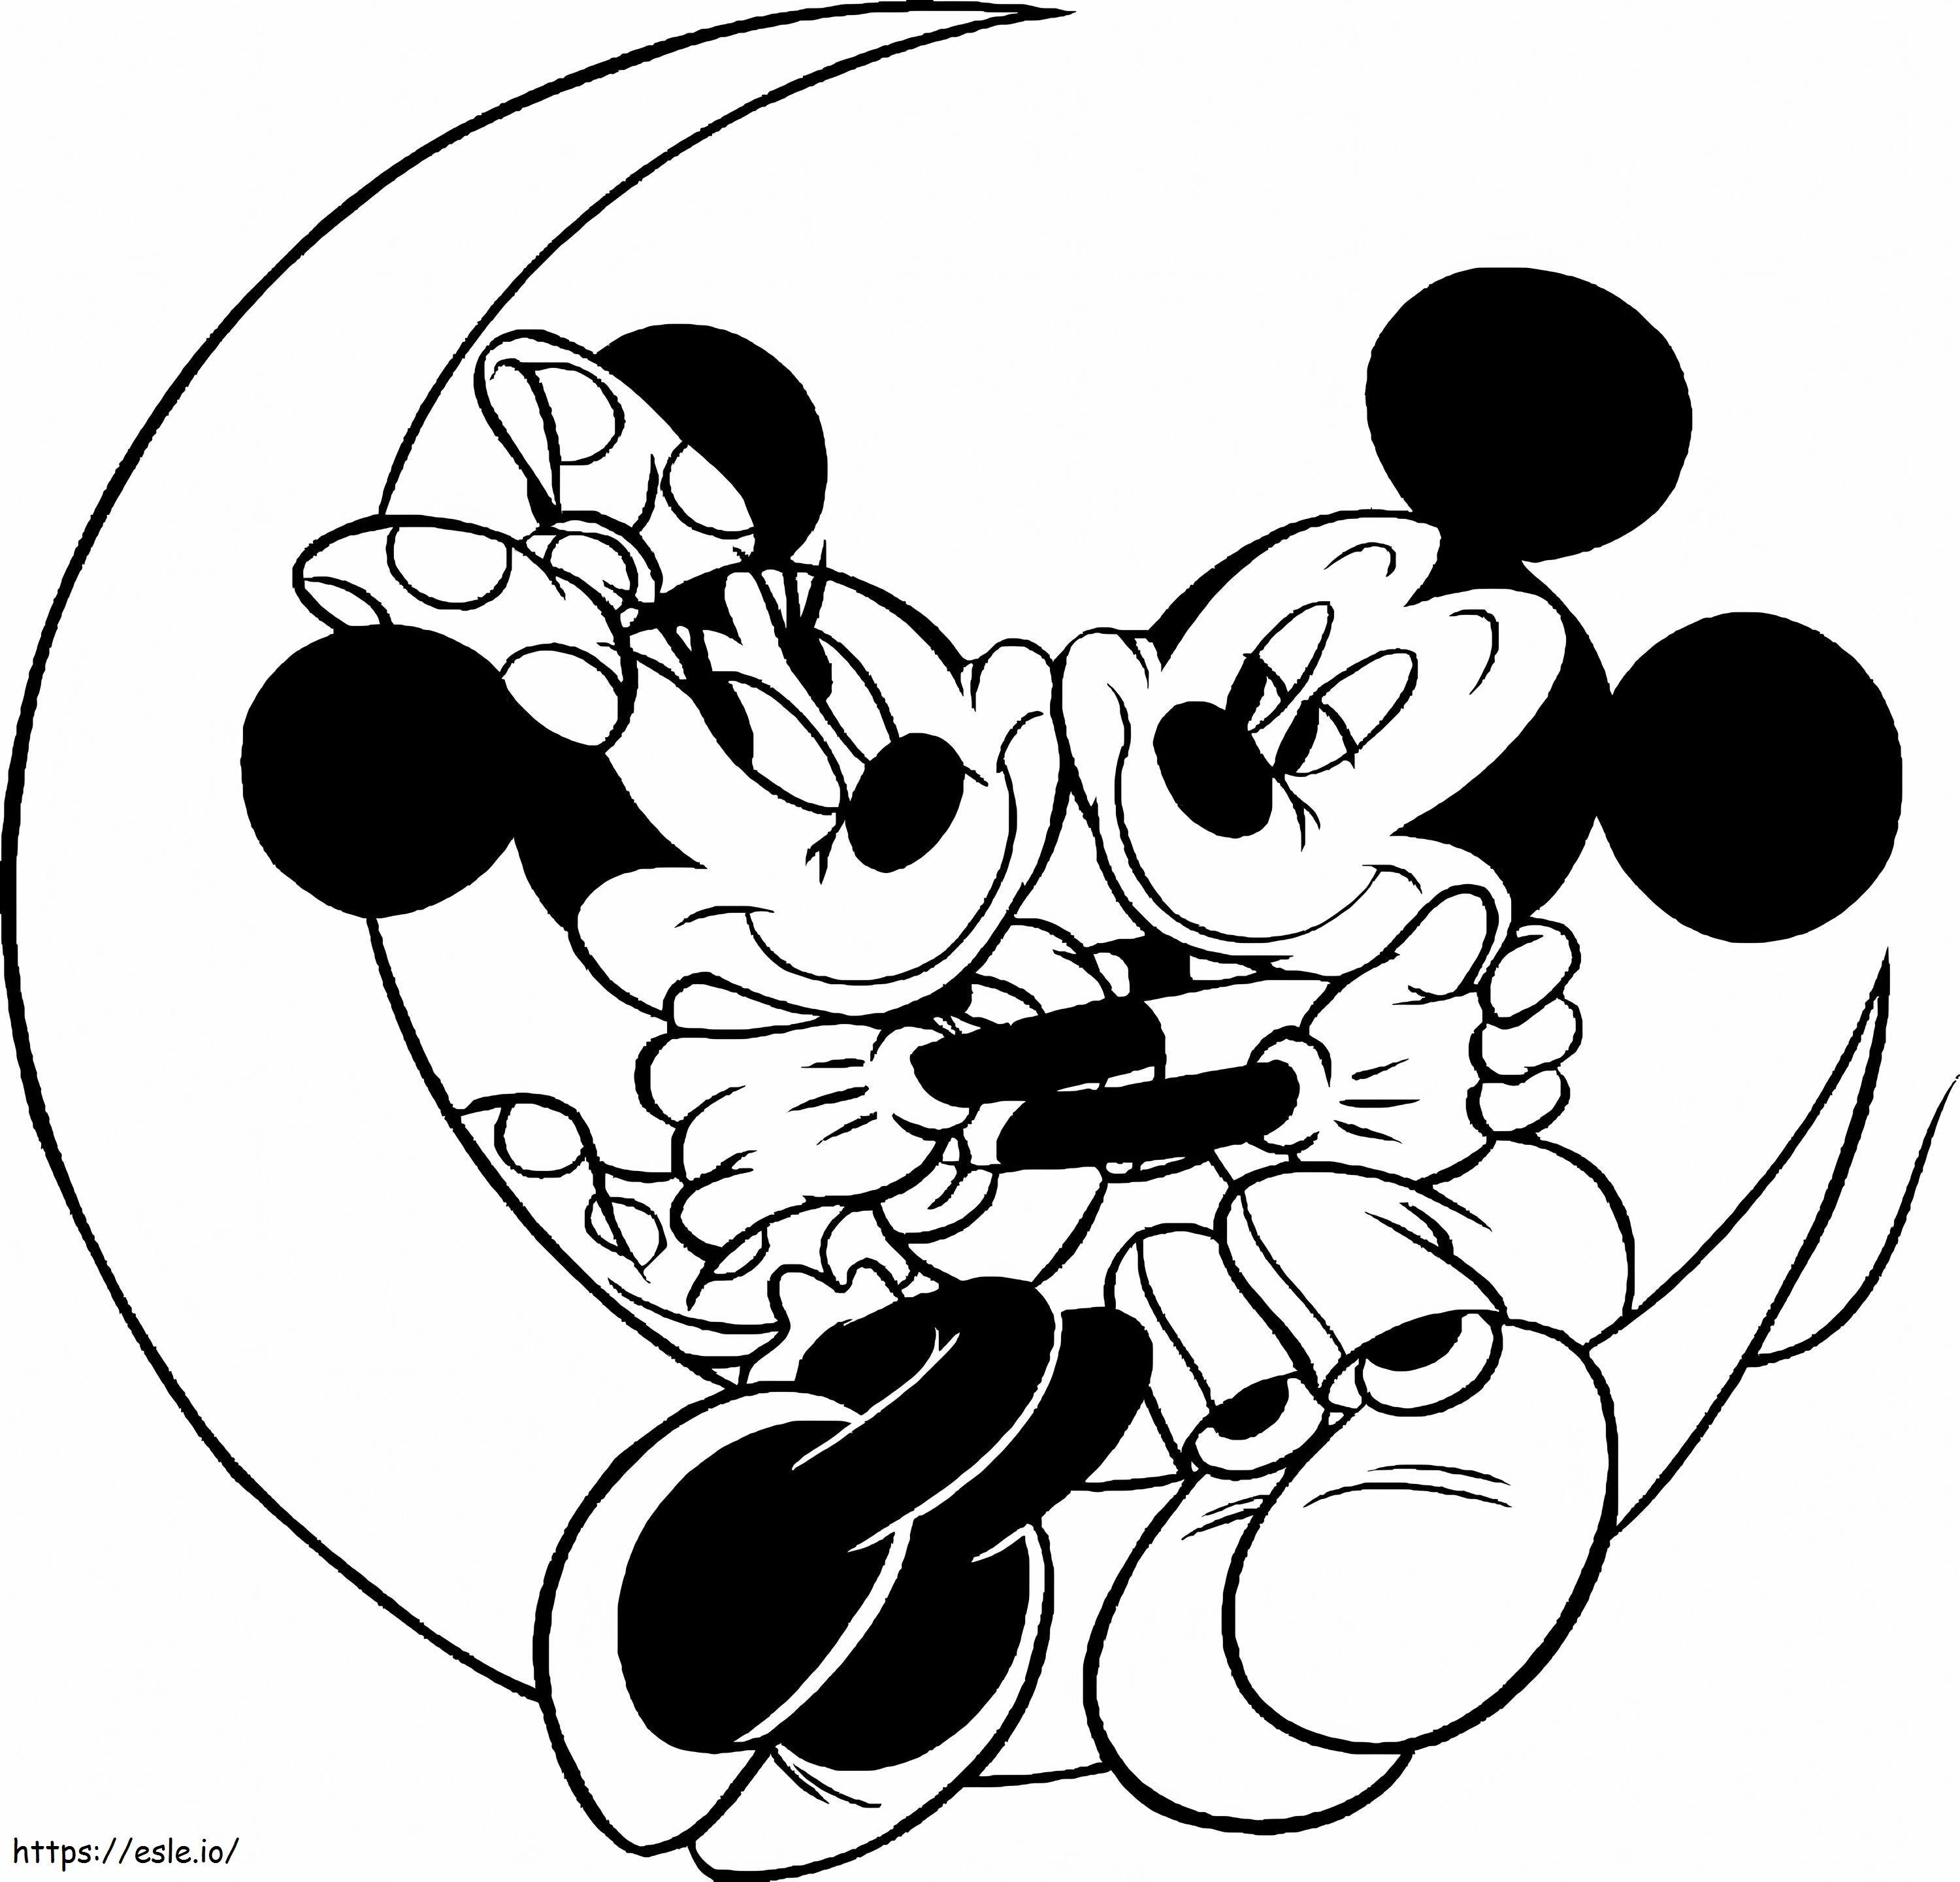 Mickey And Minnie Mouse On The Moon coloring page